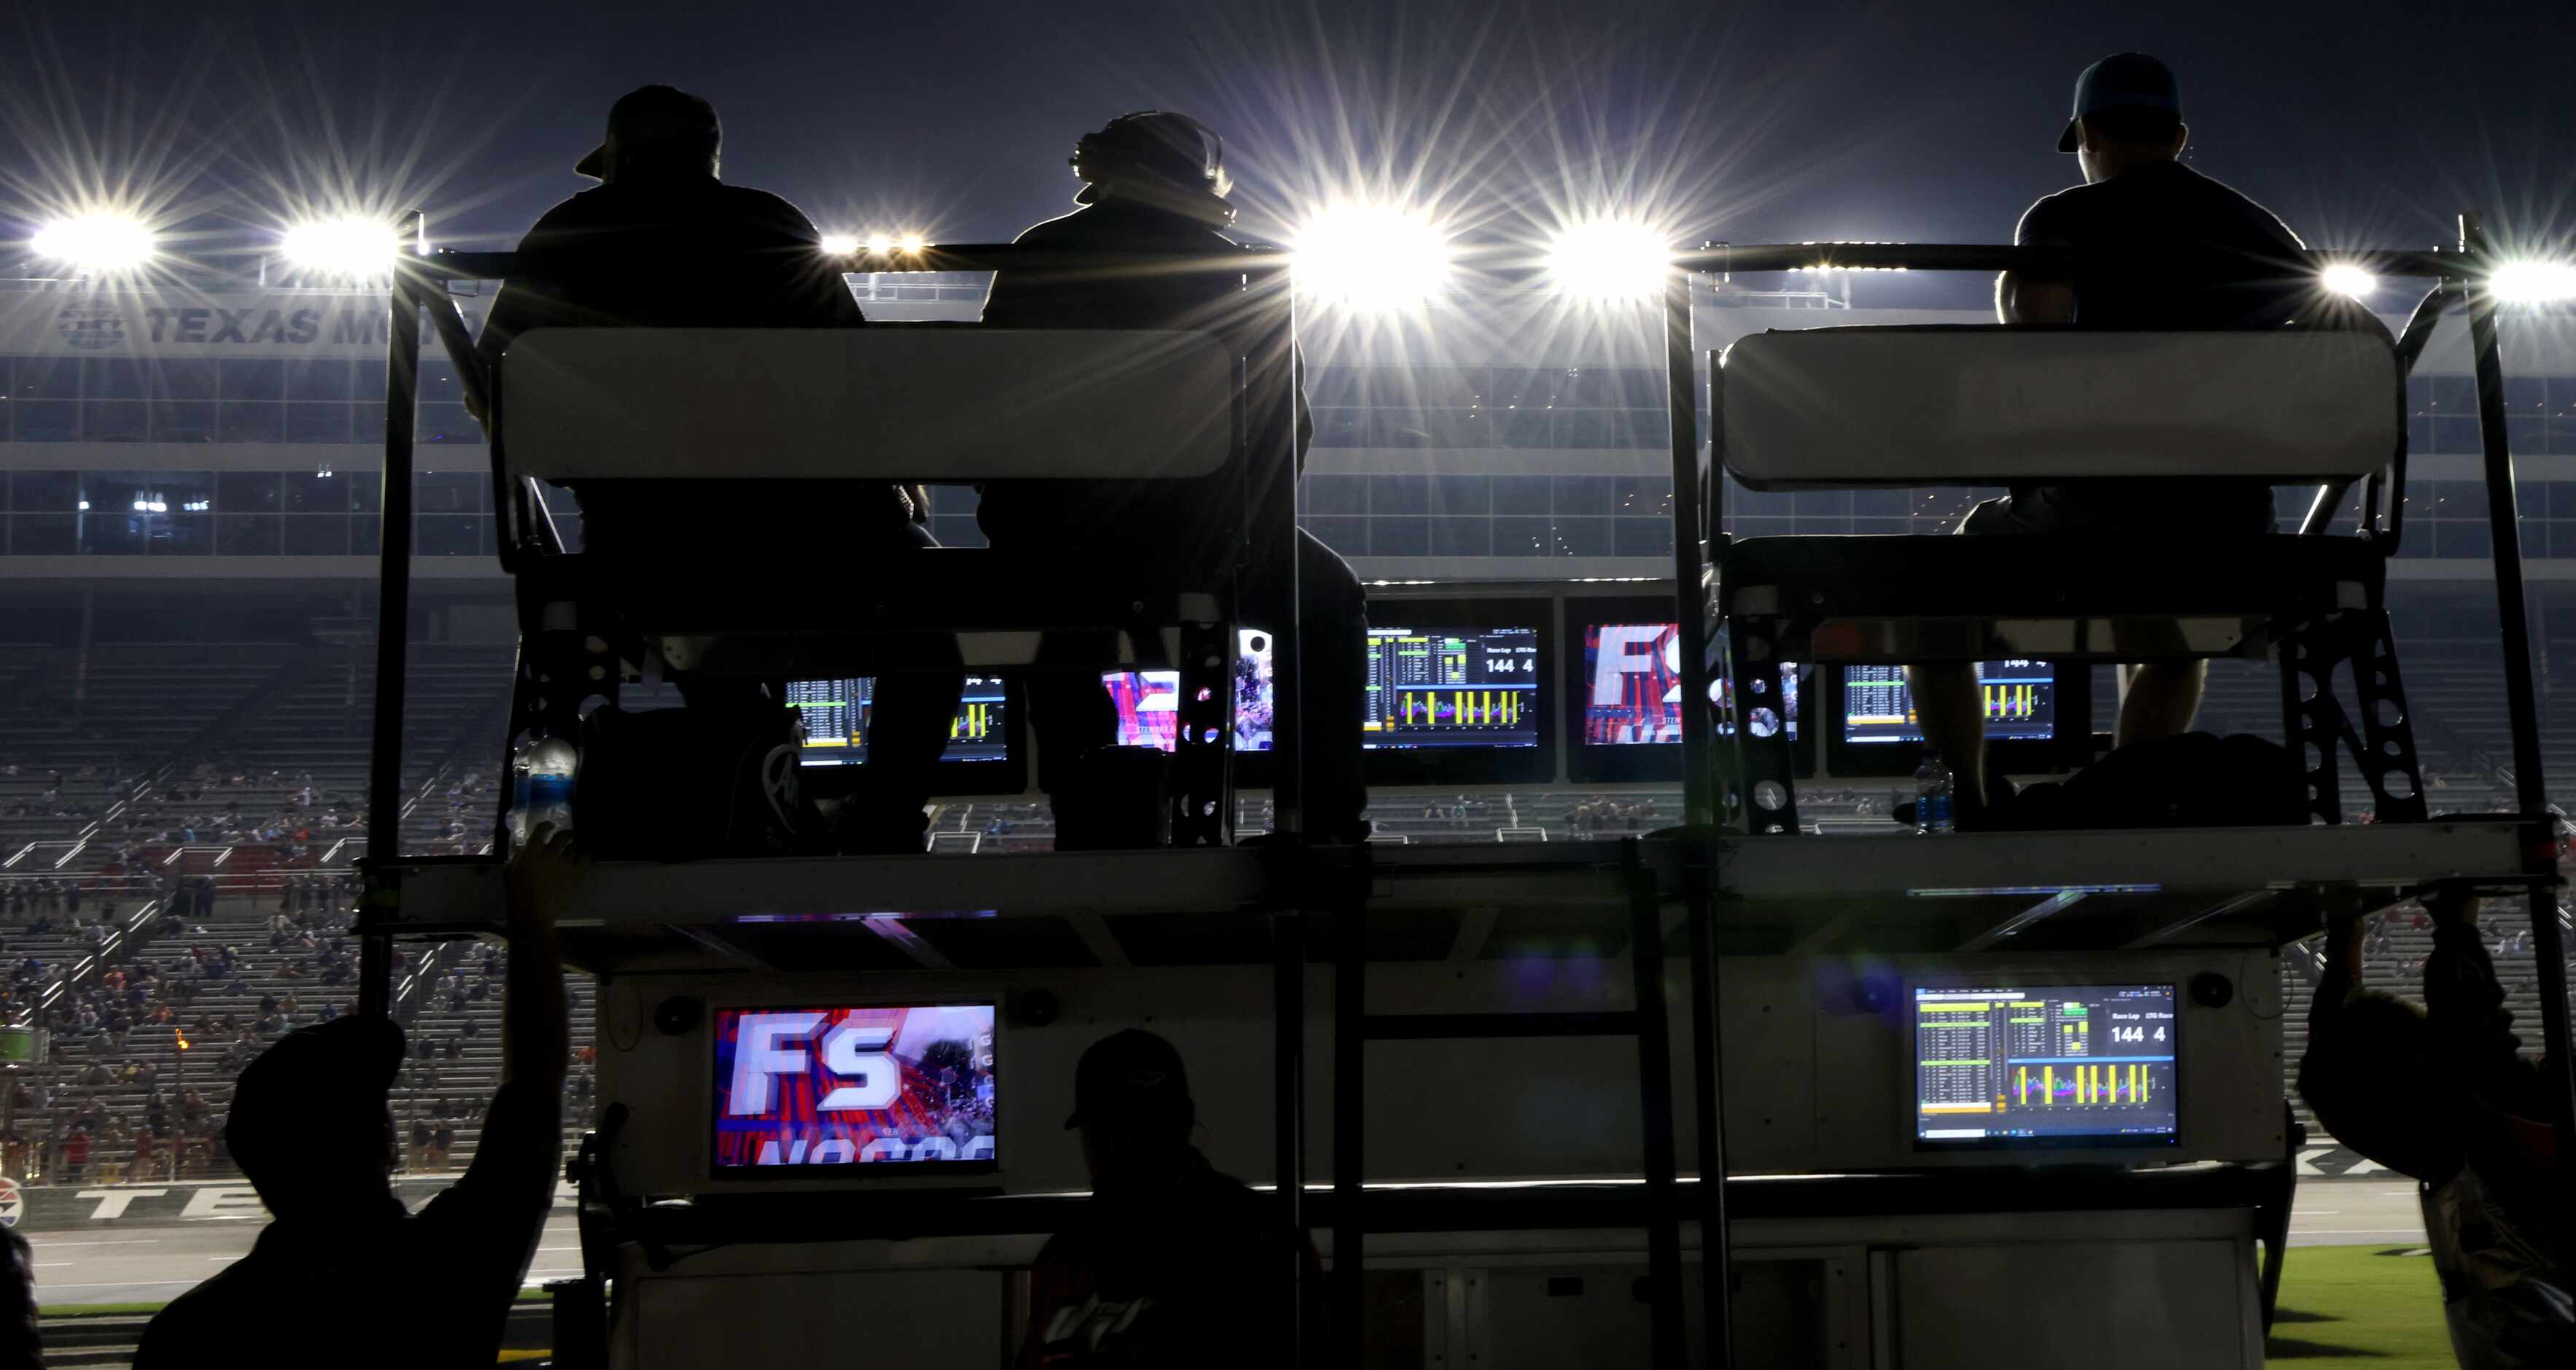 Support staff members of a racing team are silhouetted by the track lights during the final...